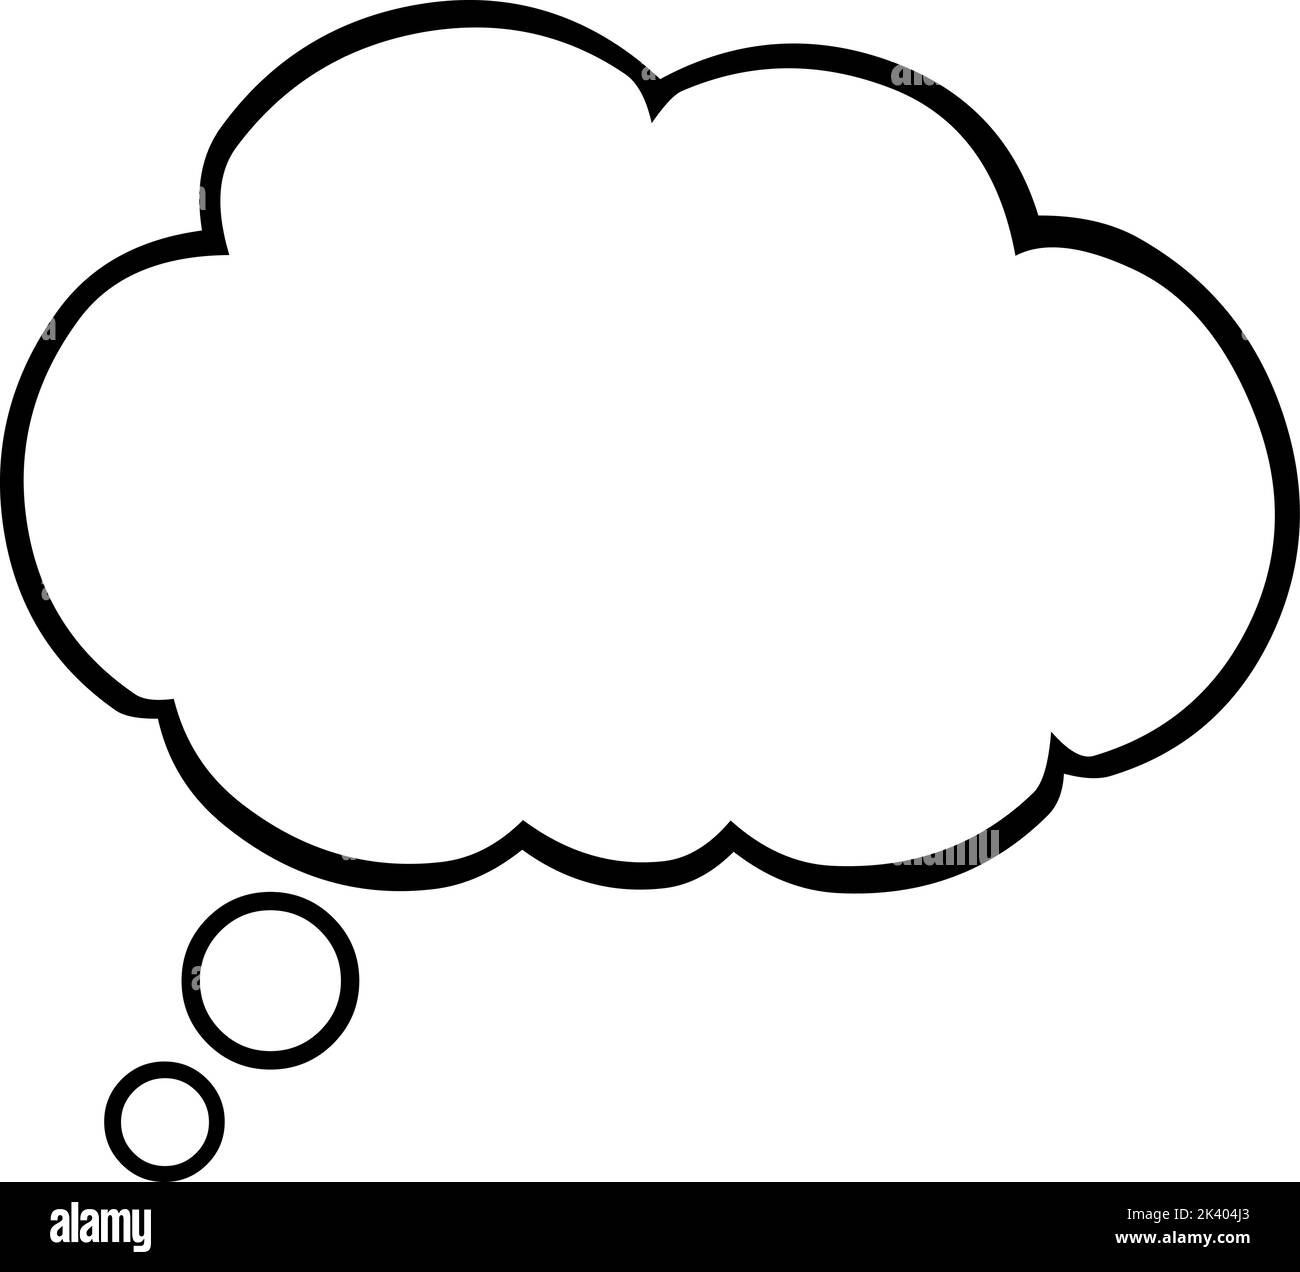 Vector illustration of a thought cloud drawn in black and white Stock Vector